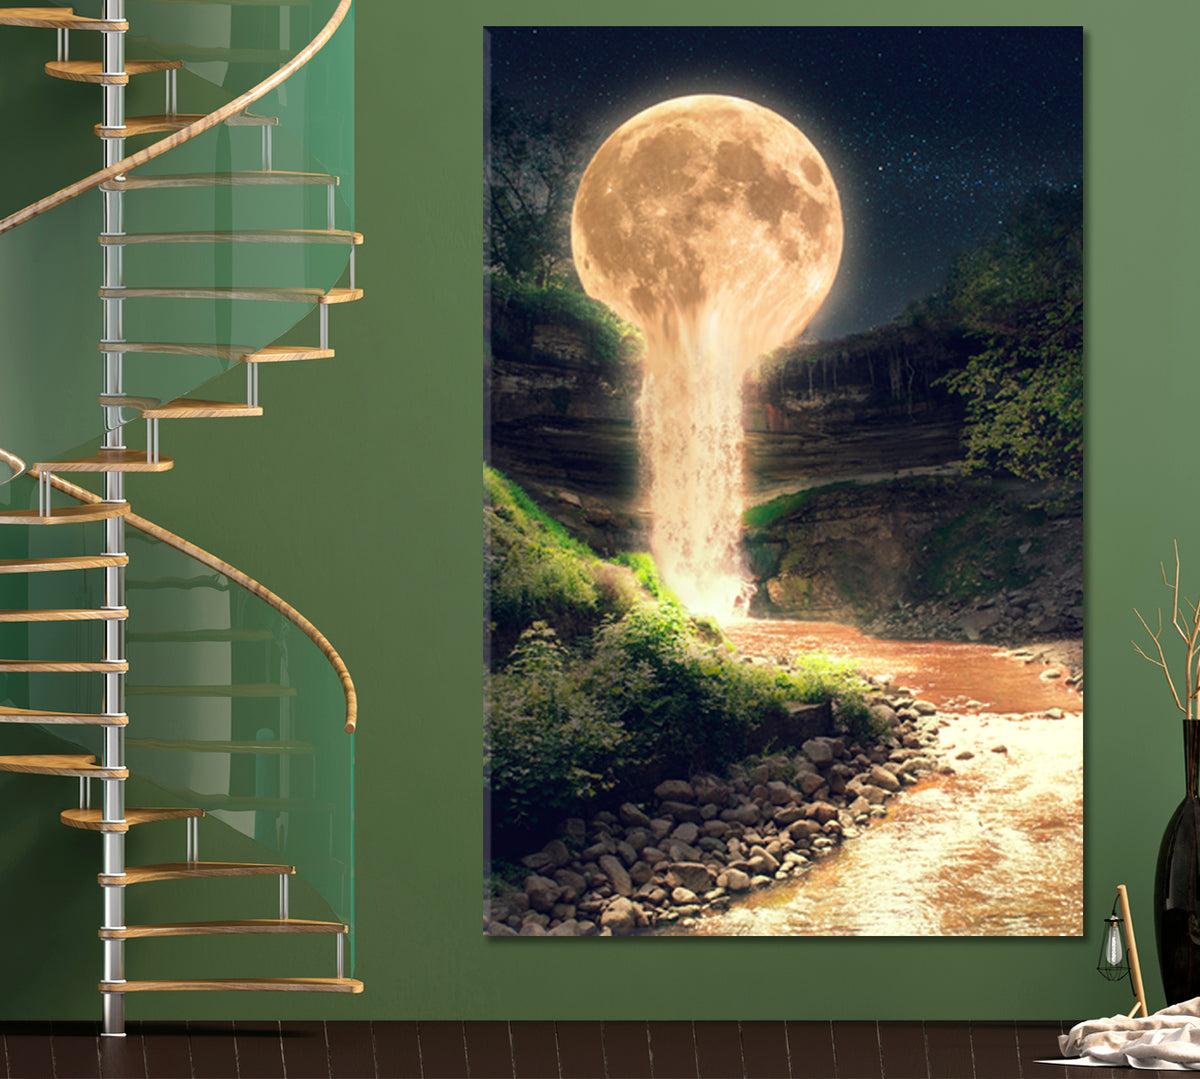 Surreal Dreamlike Landscape of Moonlight Flowing Like Water in a River - Vertical Surreal Fantasy Large Art Print Décor Artesty 1 Panel 16"x24" 